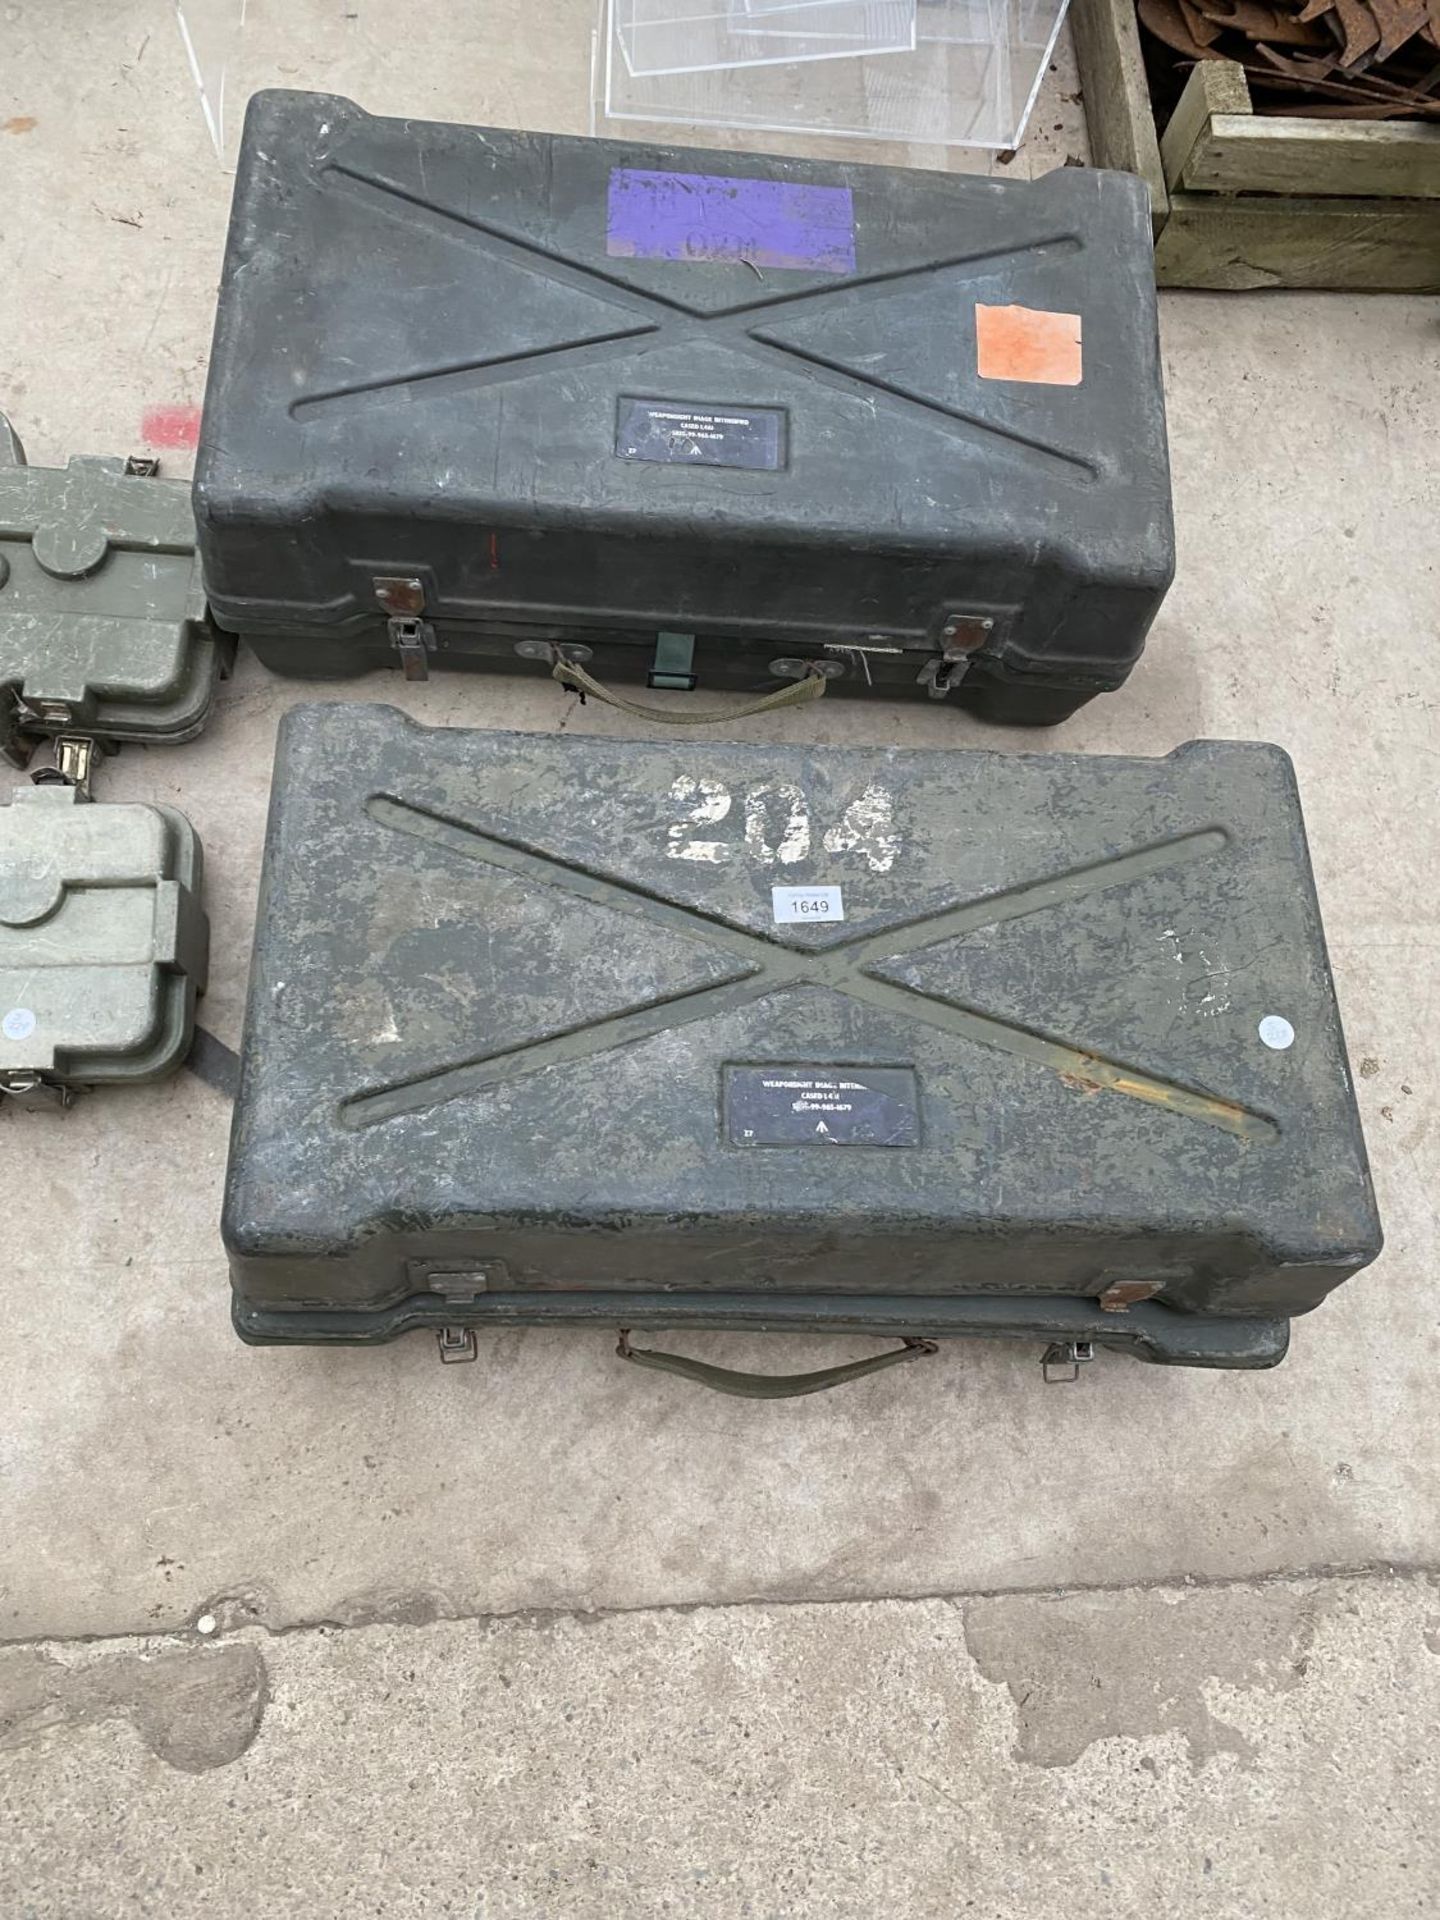 TWO VINTAGE MILITARY STORAGE CASES